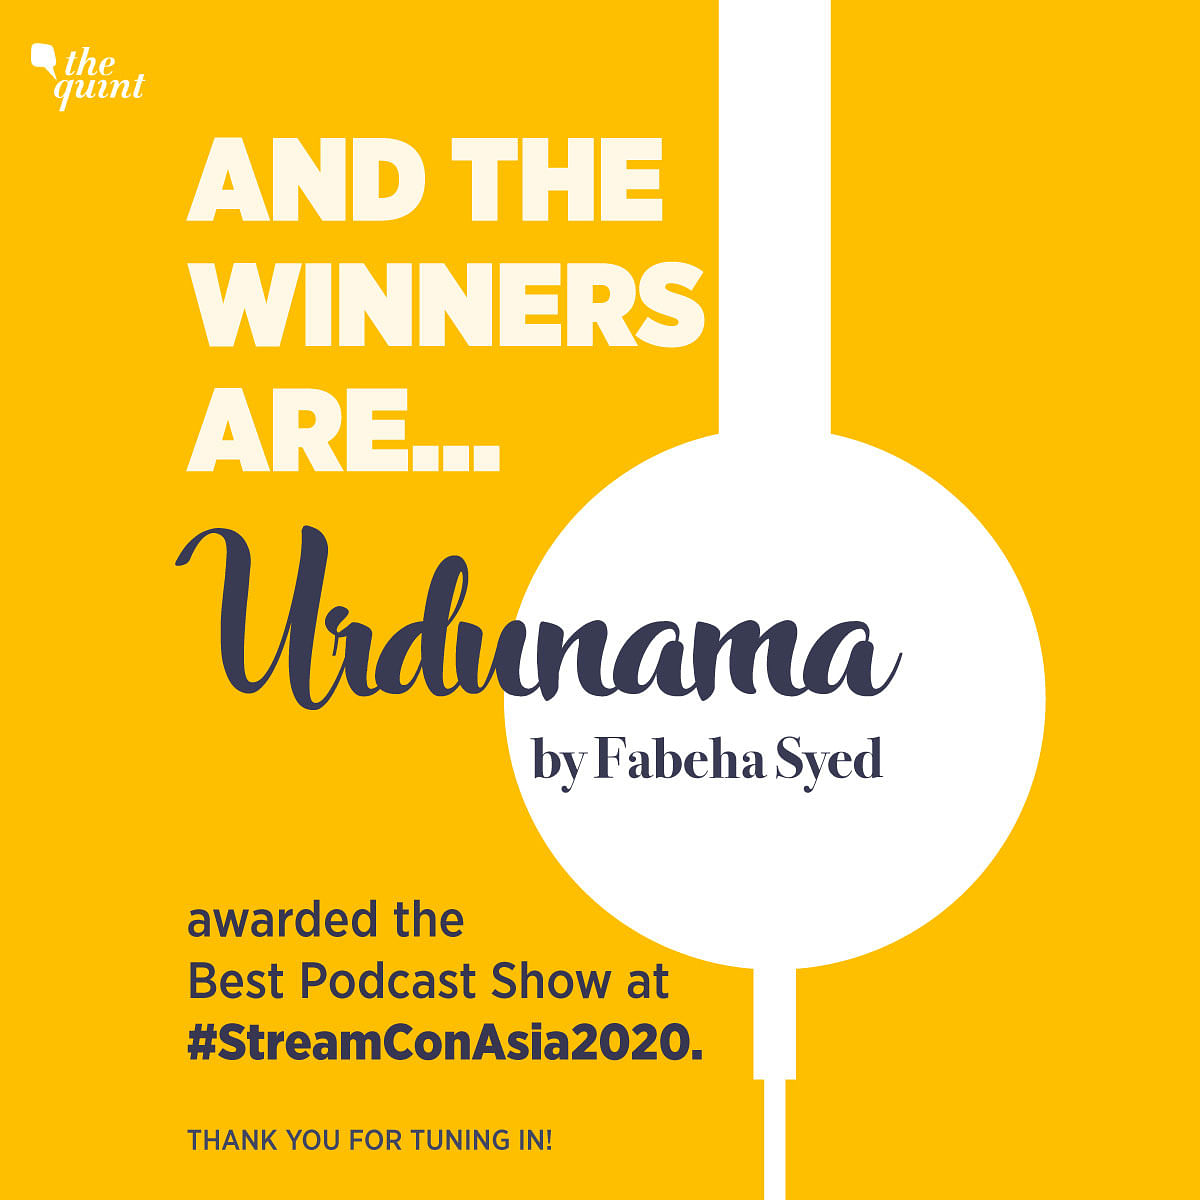 The  Quint’s team has won three awards in the 2nd edition of StreamCon Asia Awards 2020.